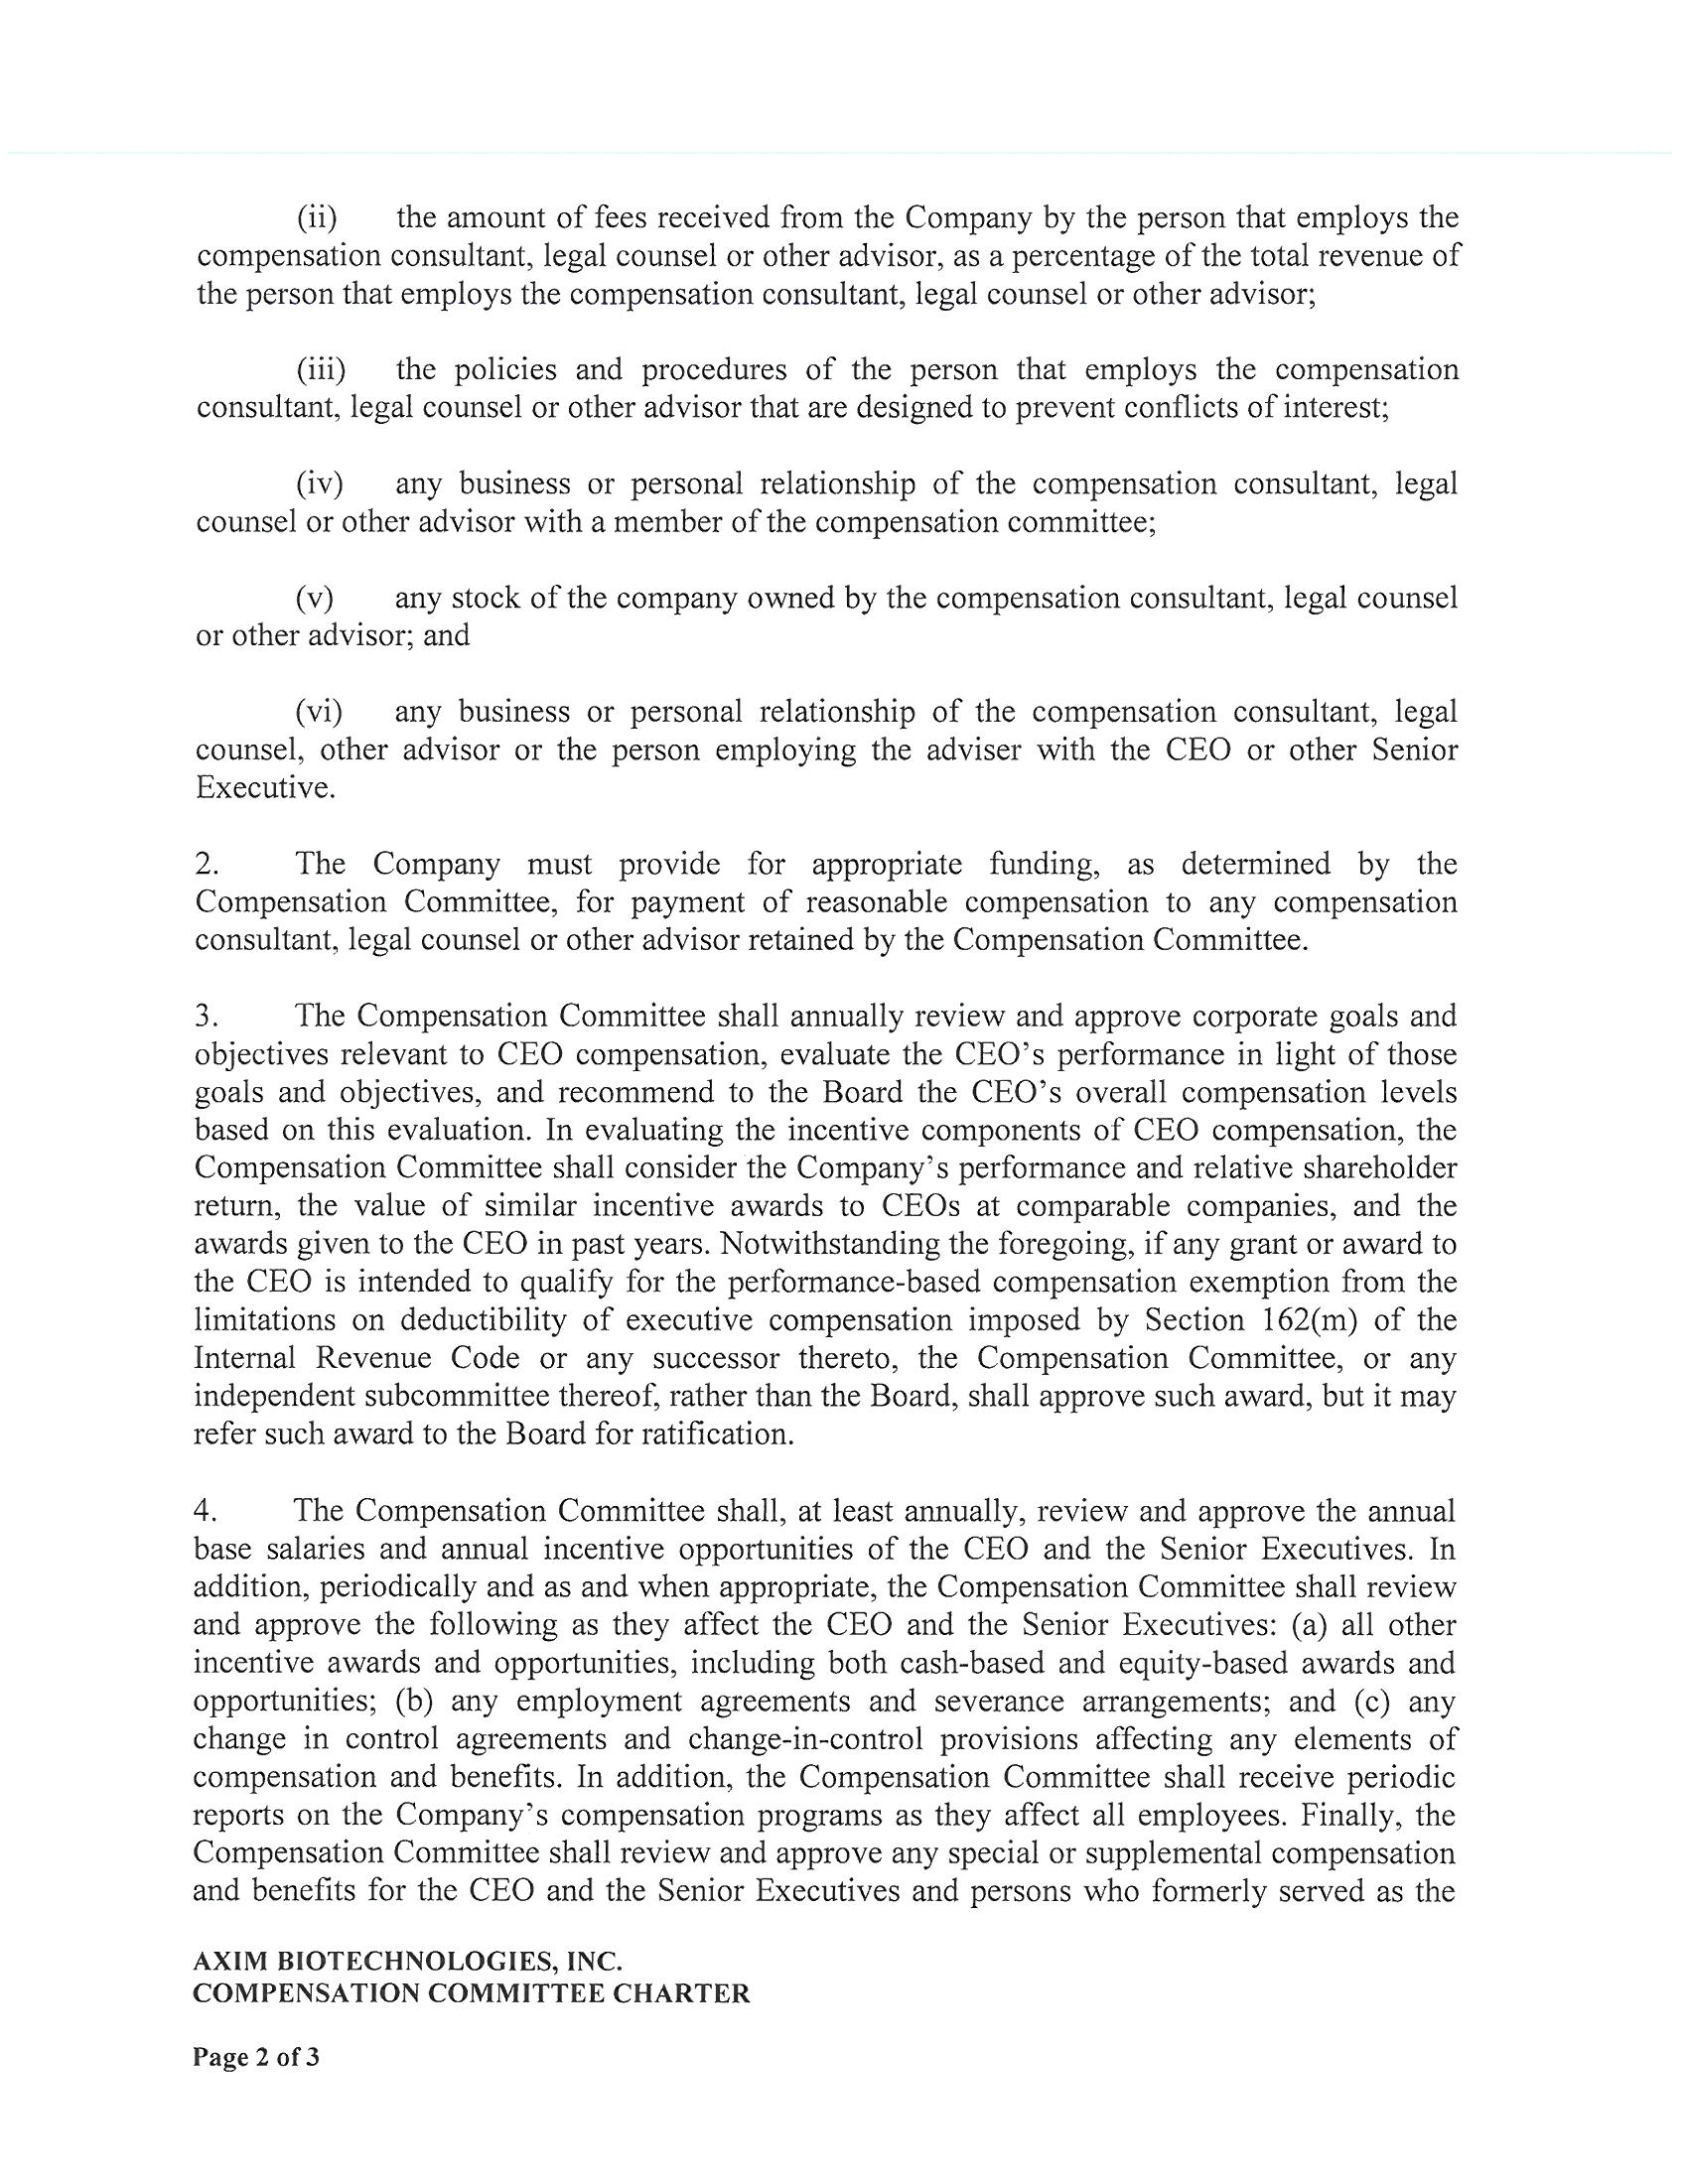 99.2 Compensation Committee Charter_Page_2.jpg